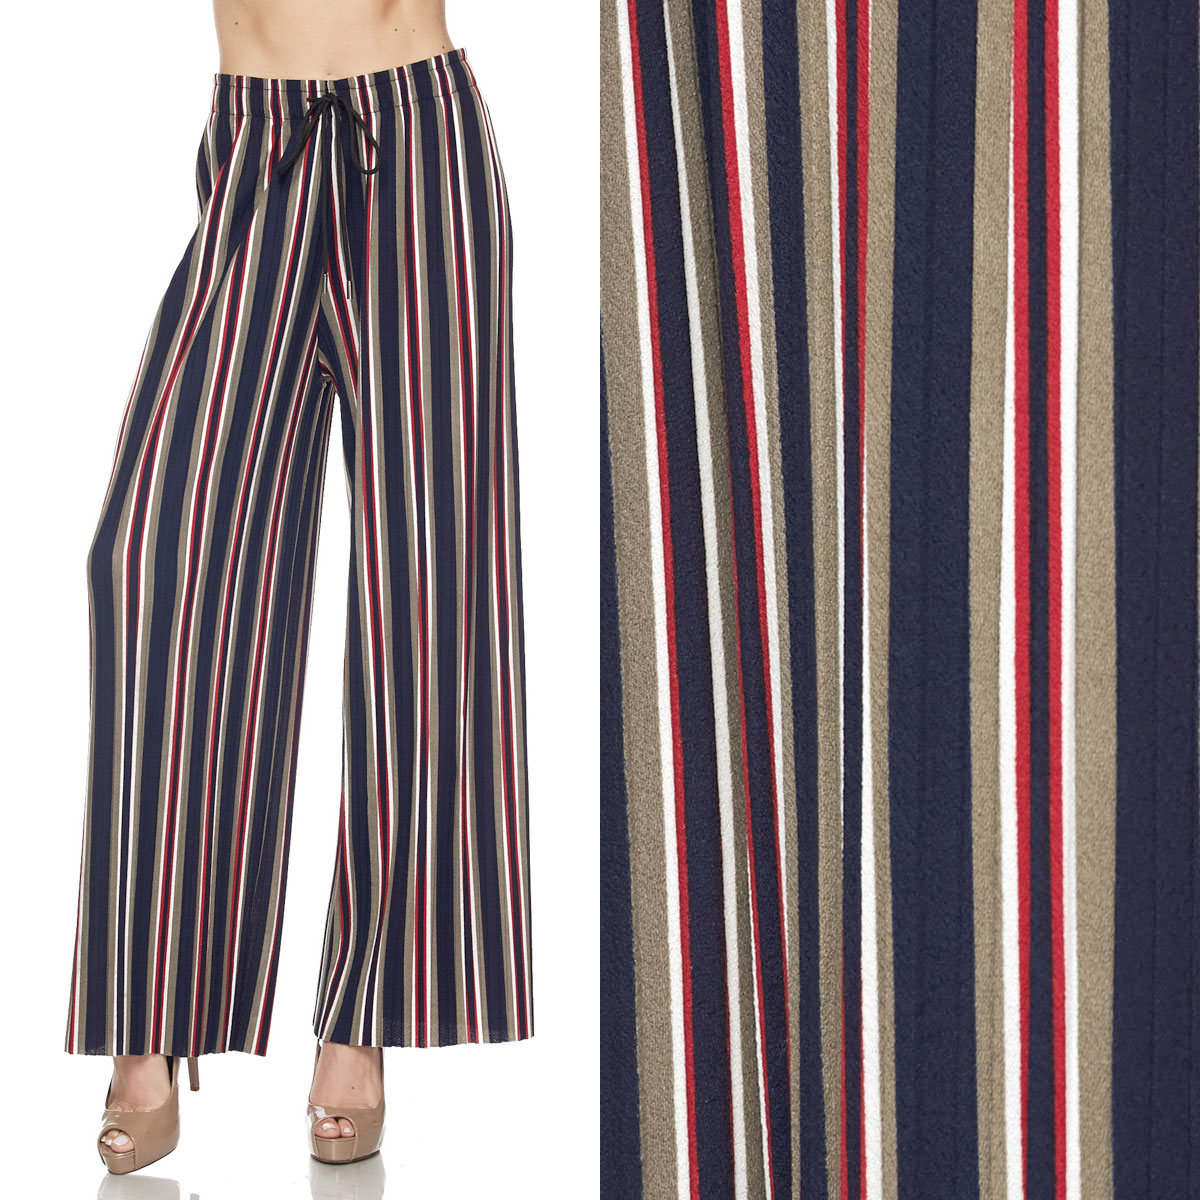 PLUS #05 Striped Navy-Taupe-Red